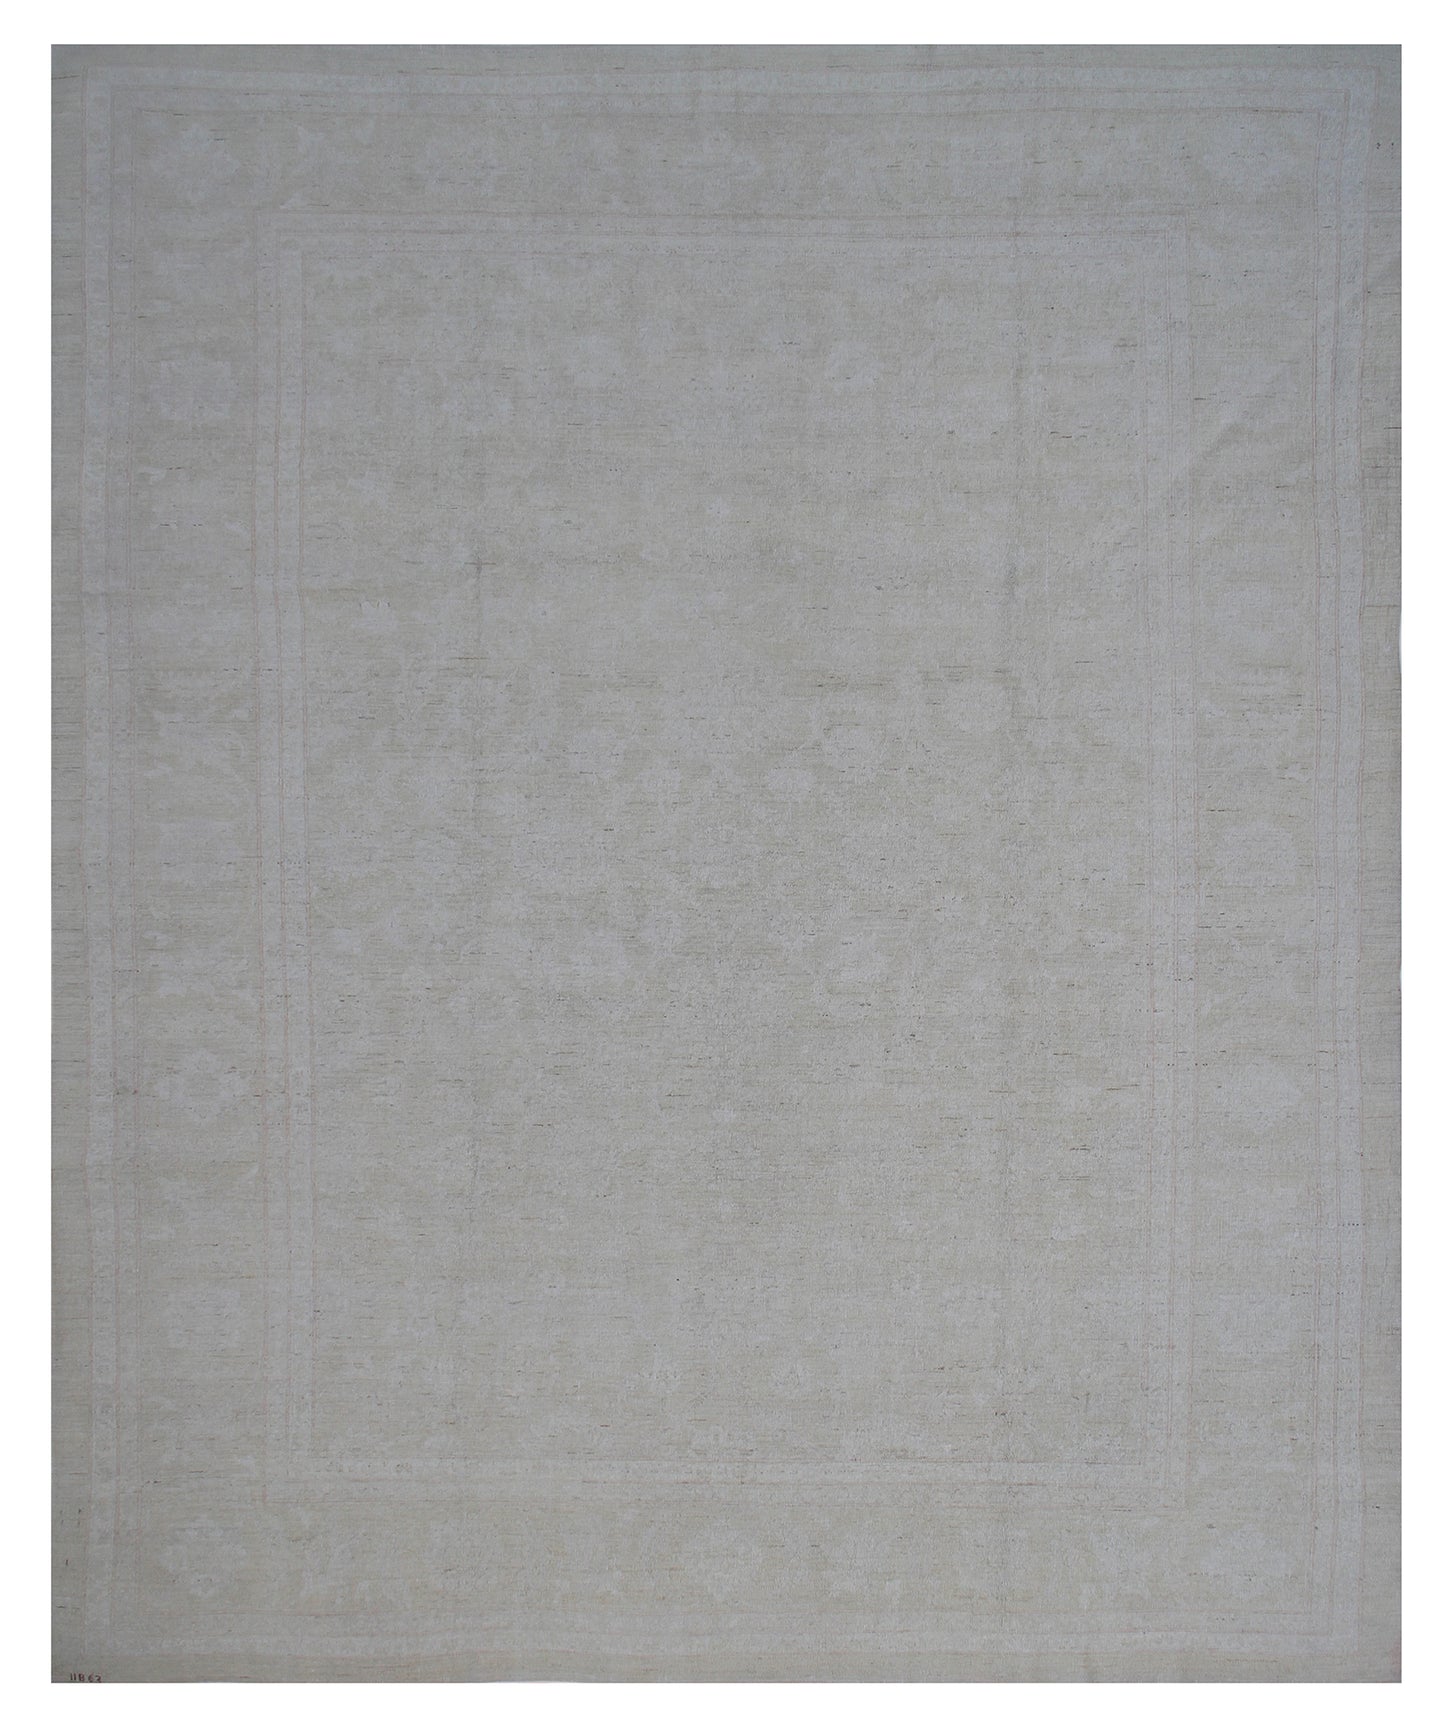 9'x12' Soft Pale Washed-out Ariana Transitional Rug